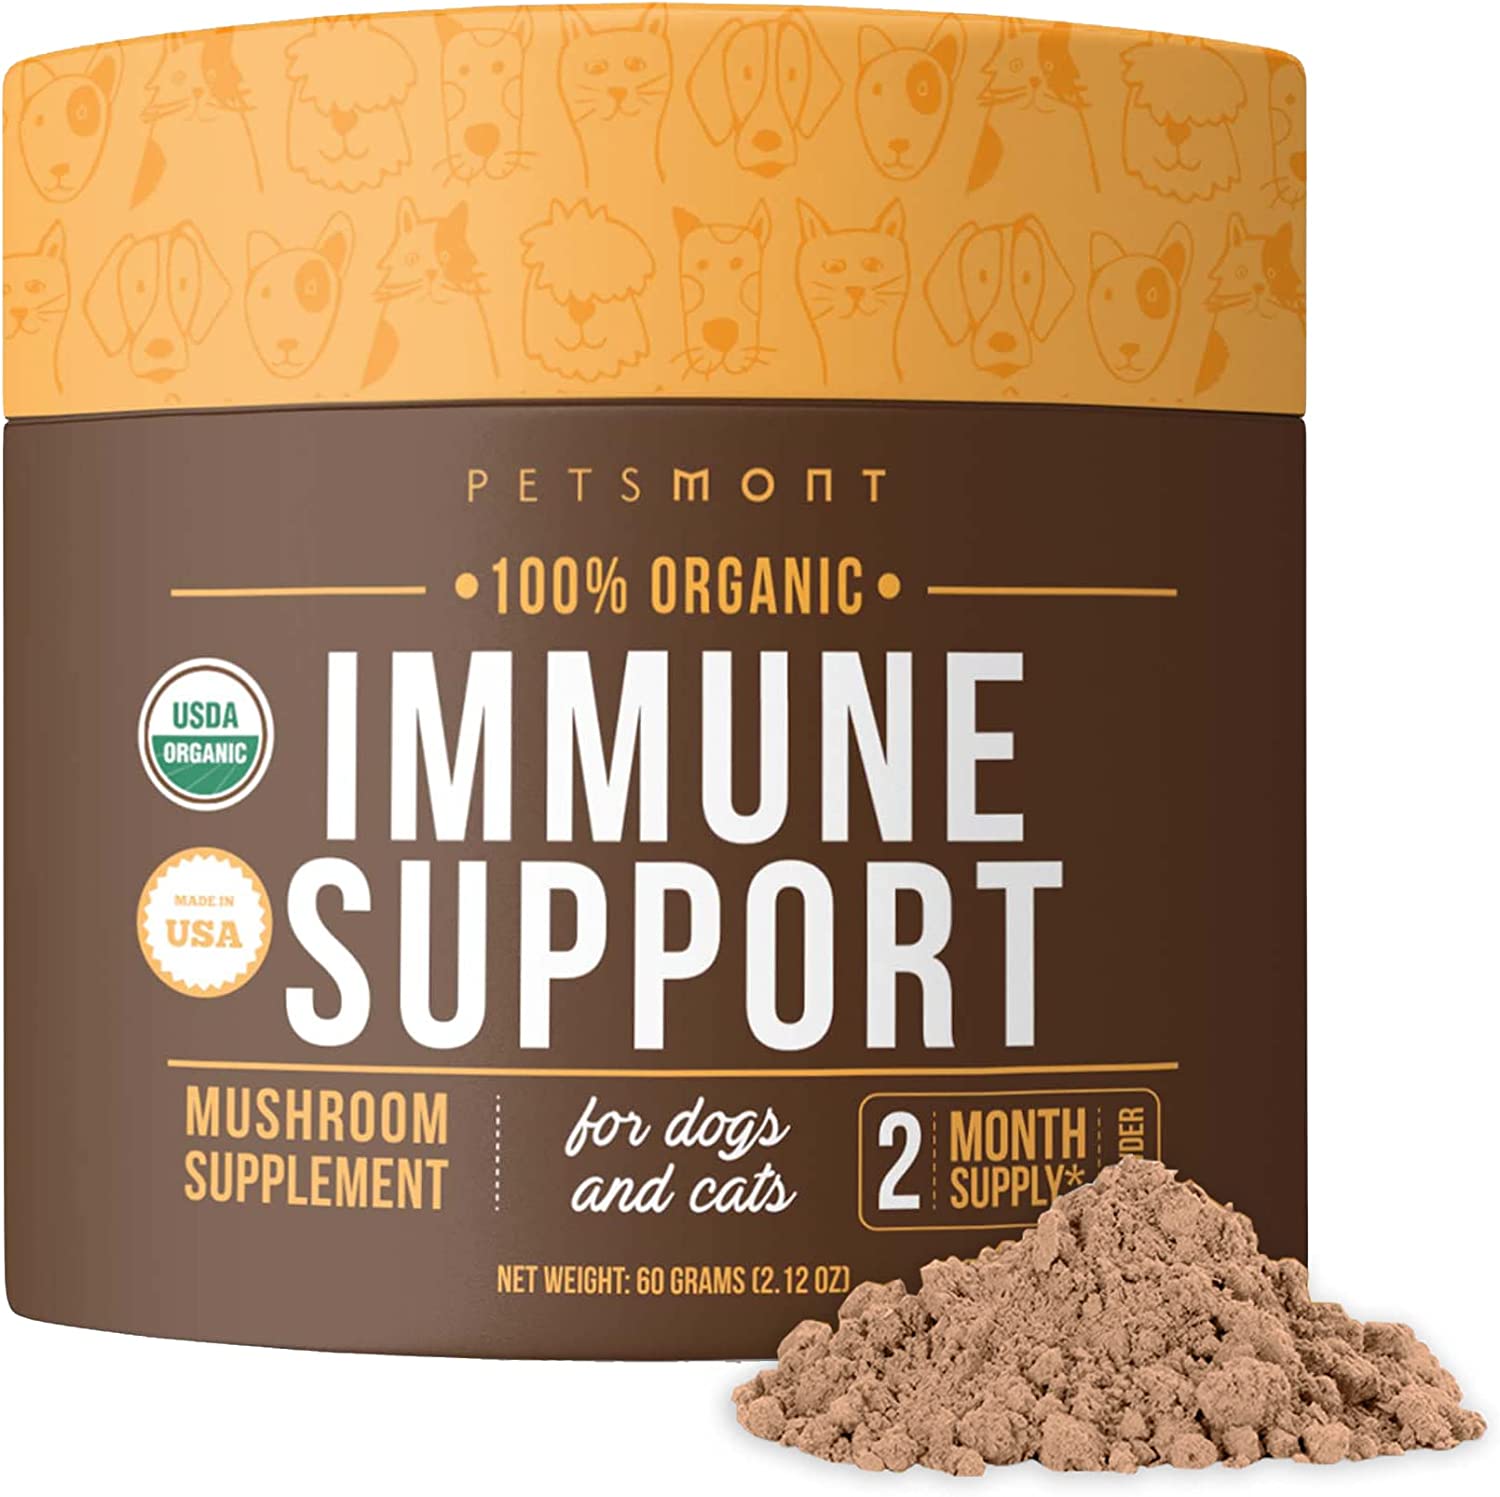 9. Petsmont Immune Support for Lumps and Bumps